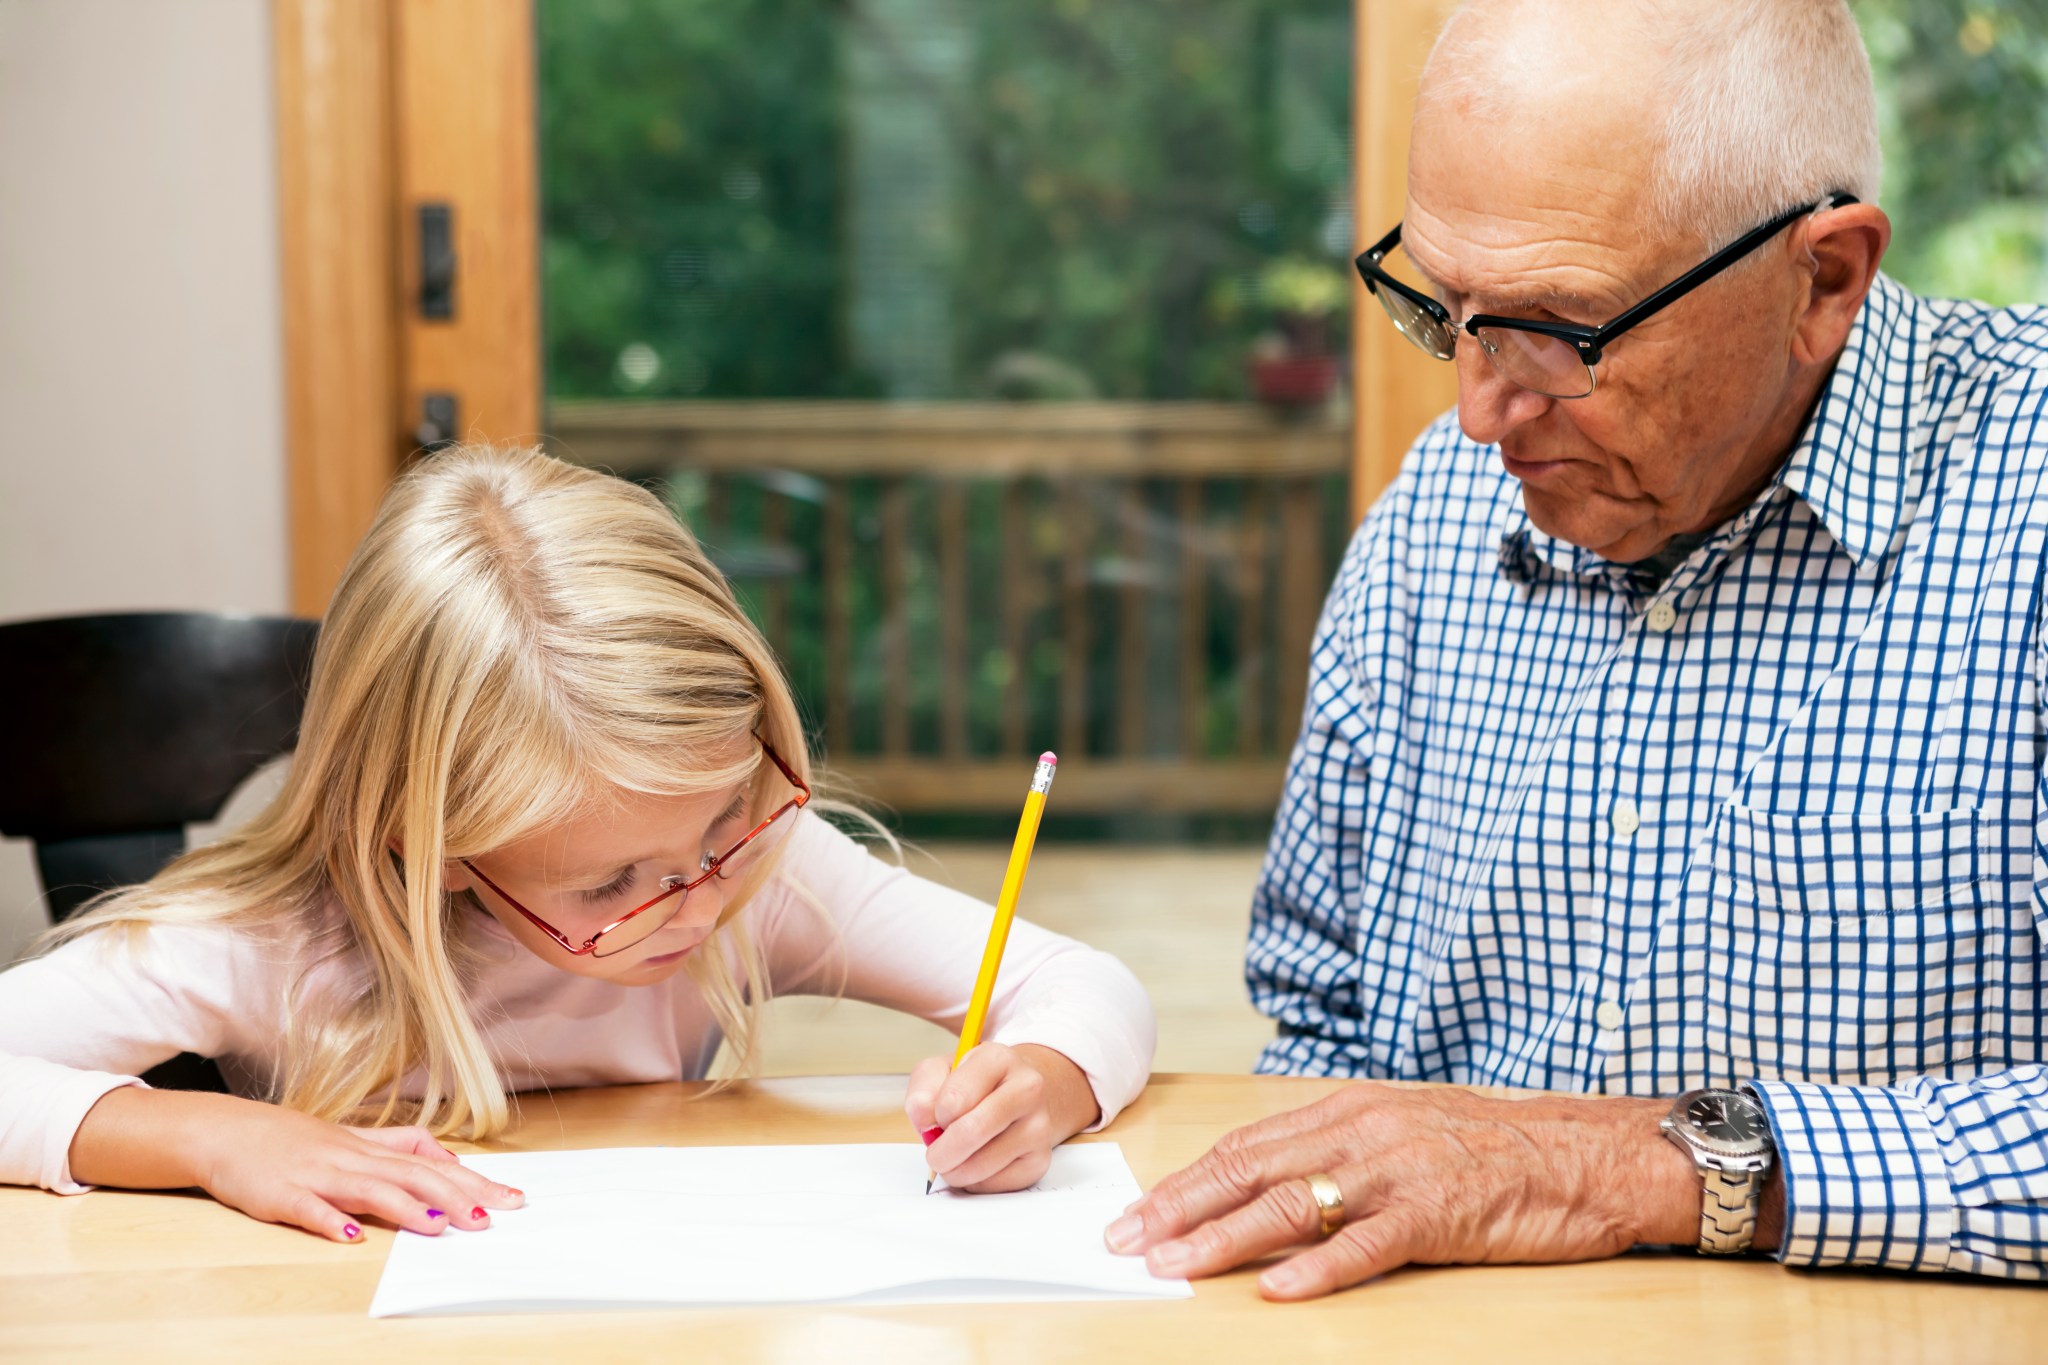 Grandfather working with grand daughter on homework.